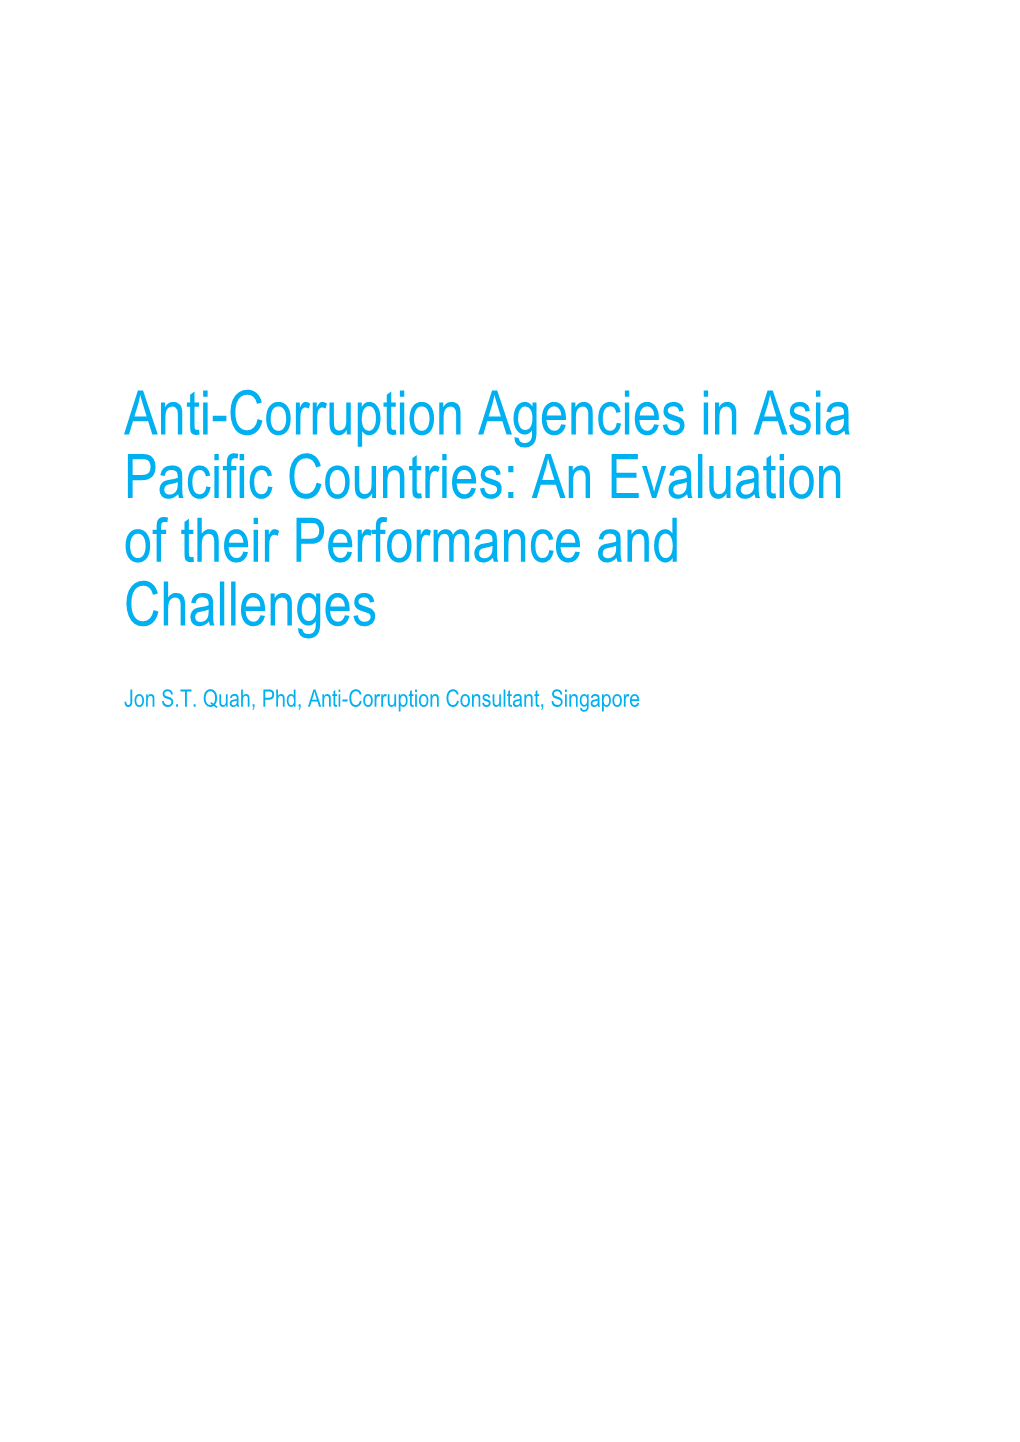 Anti-Corruption Agencies in Asia Pacific Countries: an Evaluation of Their Performance and Challenges